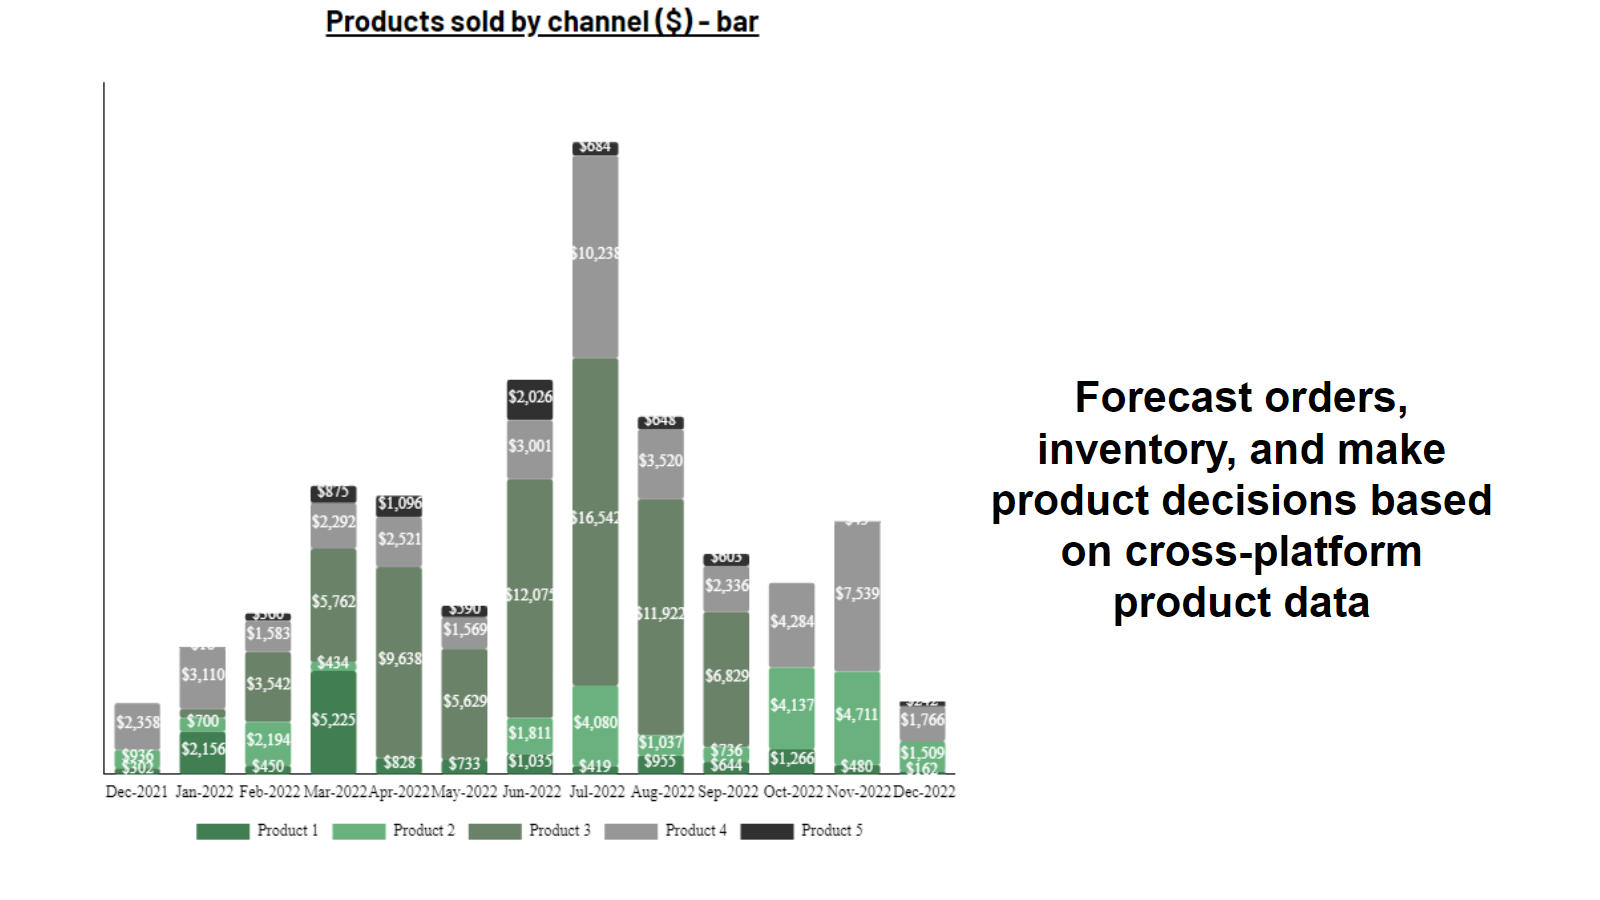 Bar graph showing individual product sales by channel